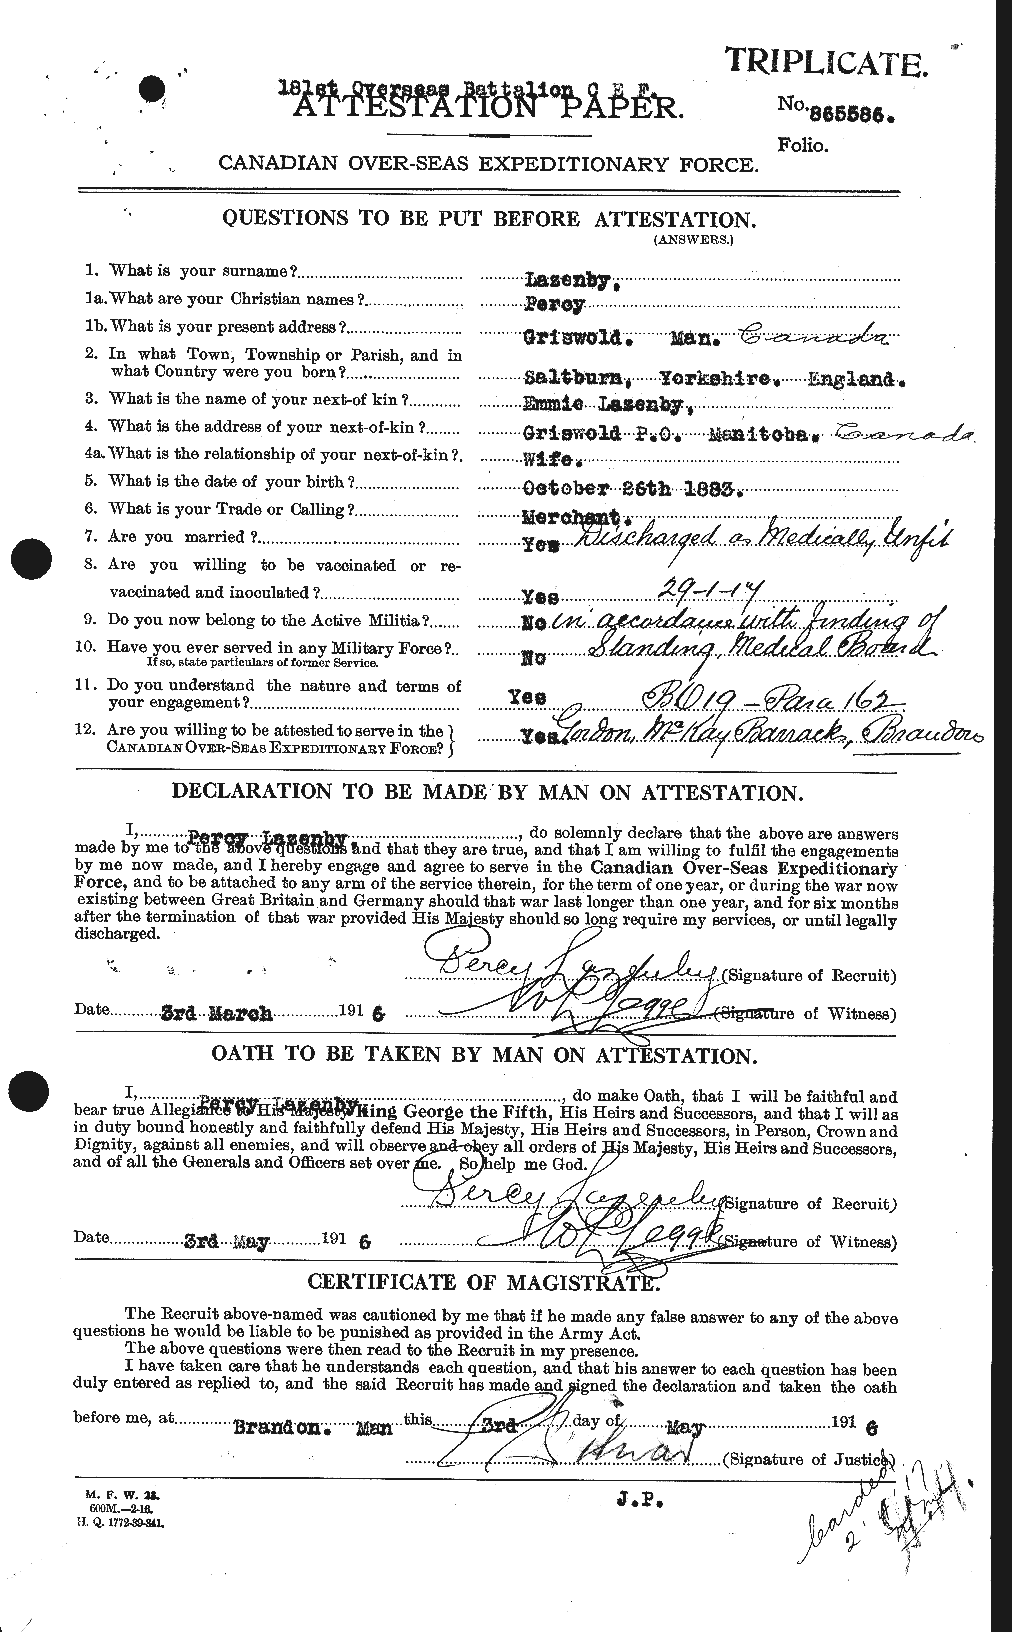 Personnel Records of the First World War - CEF 453211a